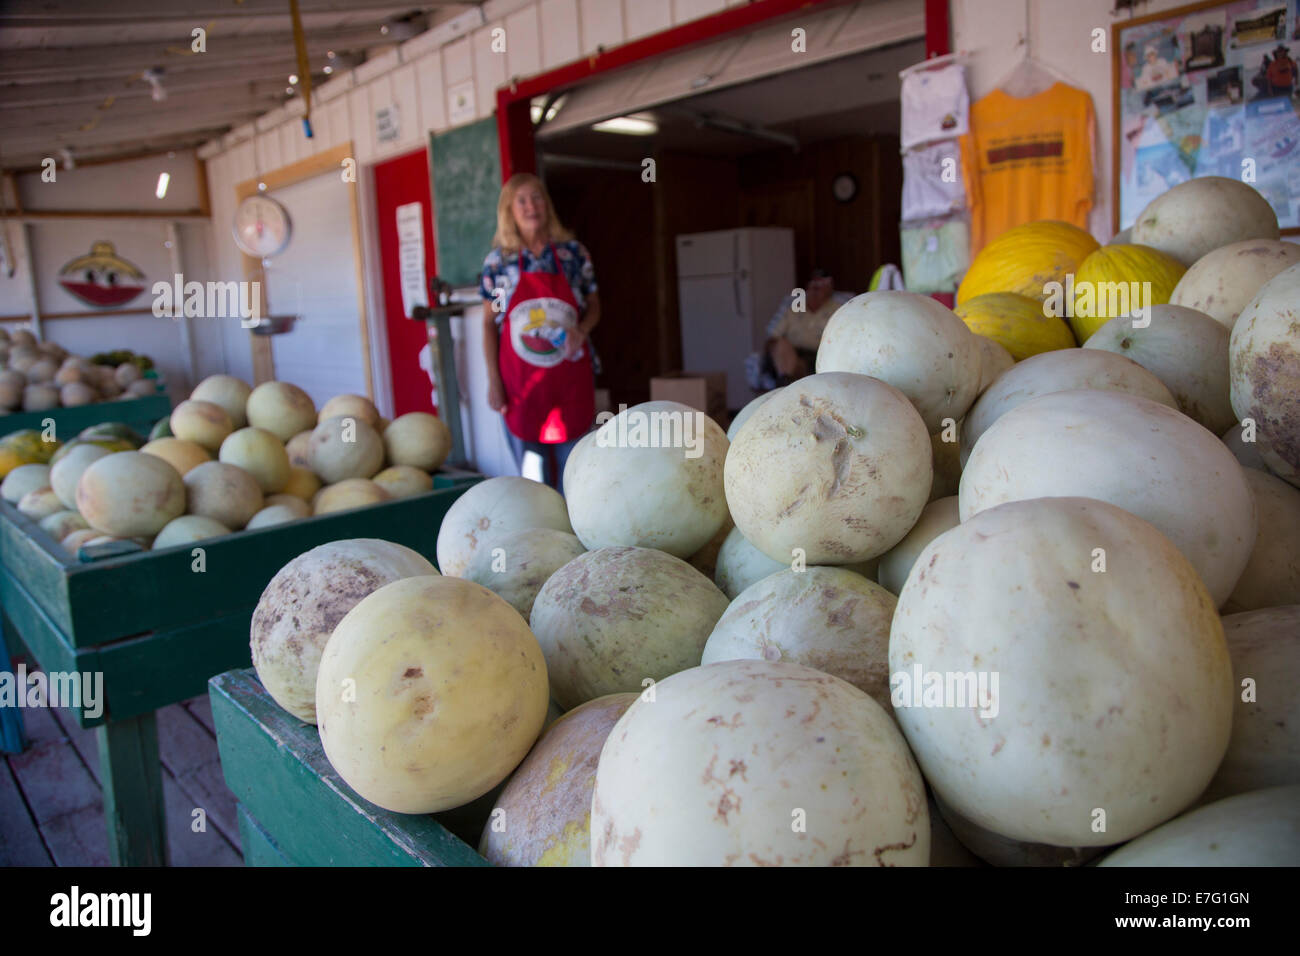 Green River, Utah - Melons from Dunham Farms for sale at a roadside stand. Stock Photo